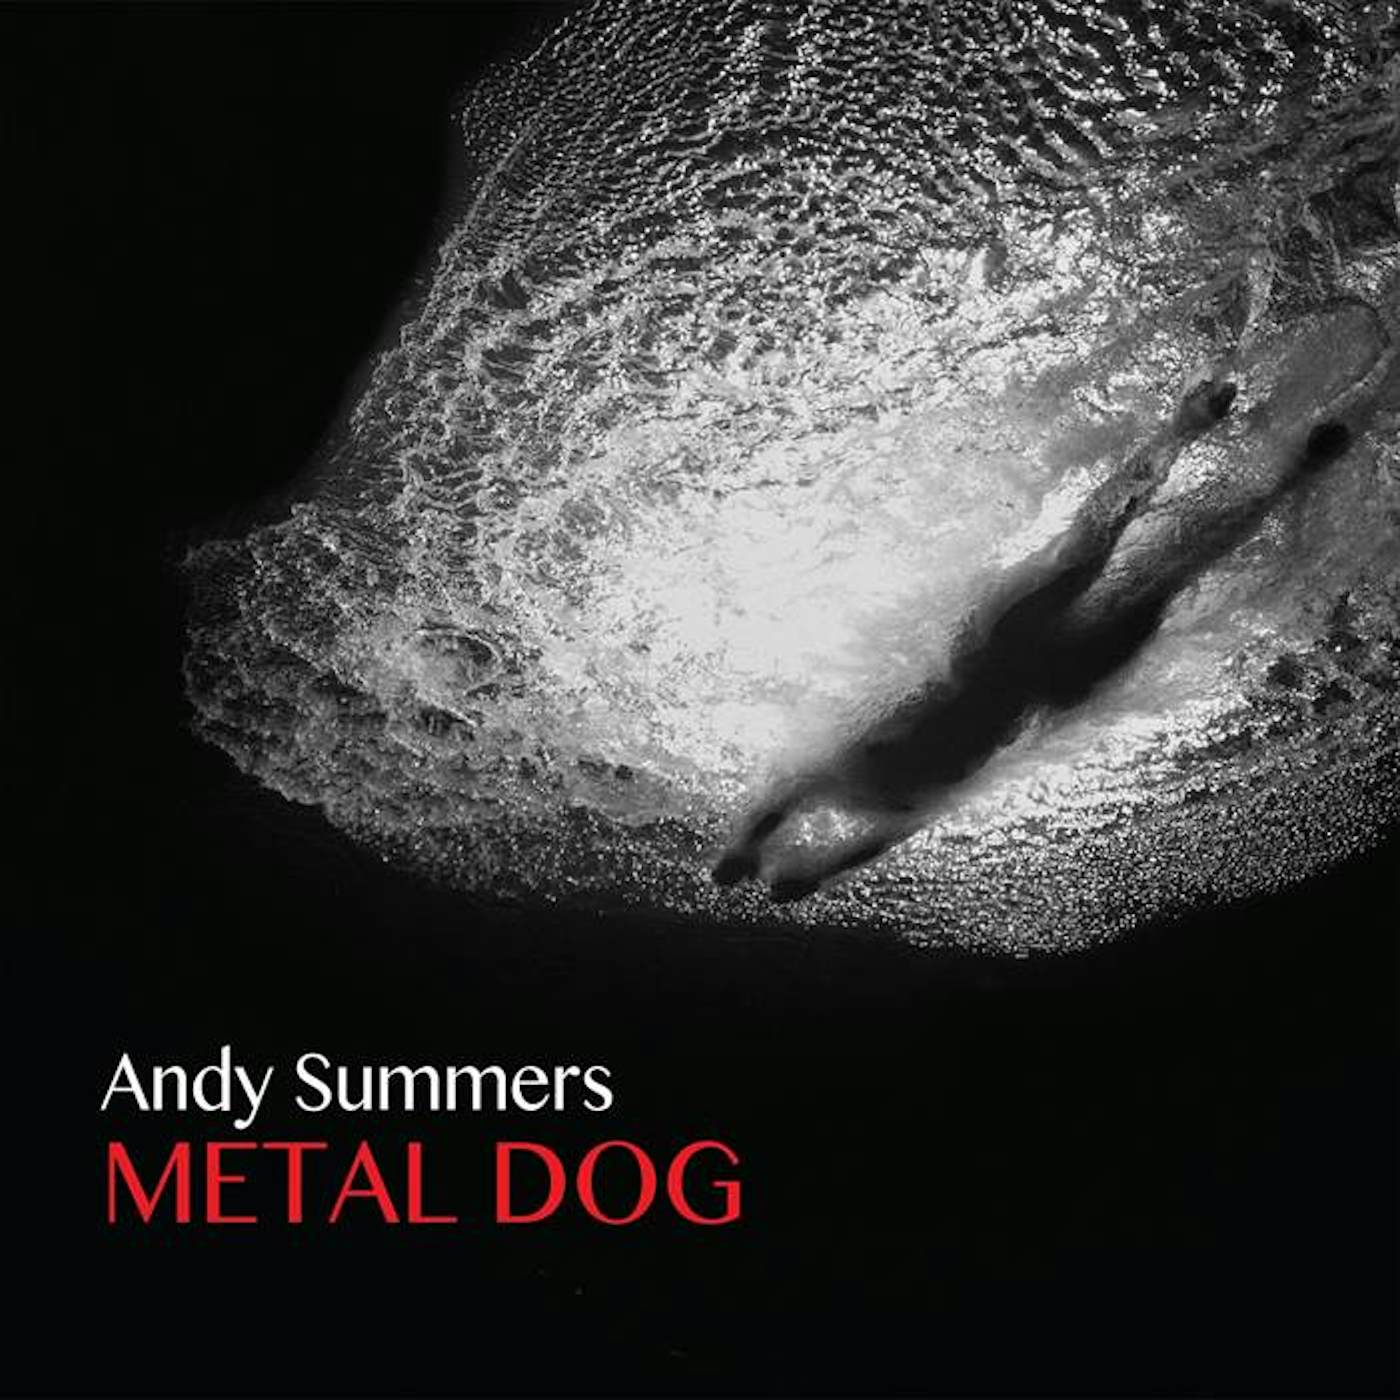 Andy Summers Metal Dog Vinyl Record